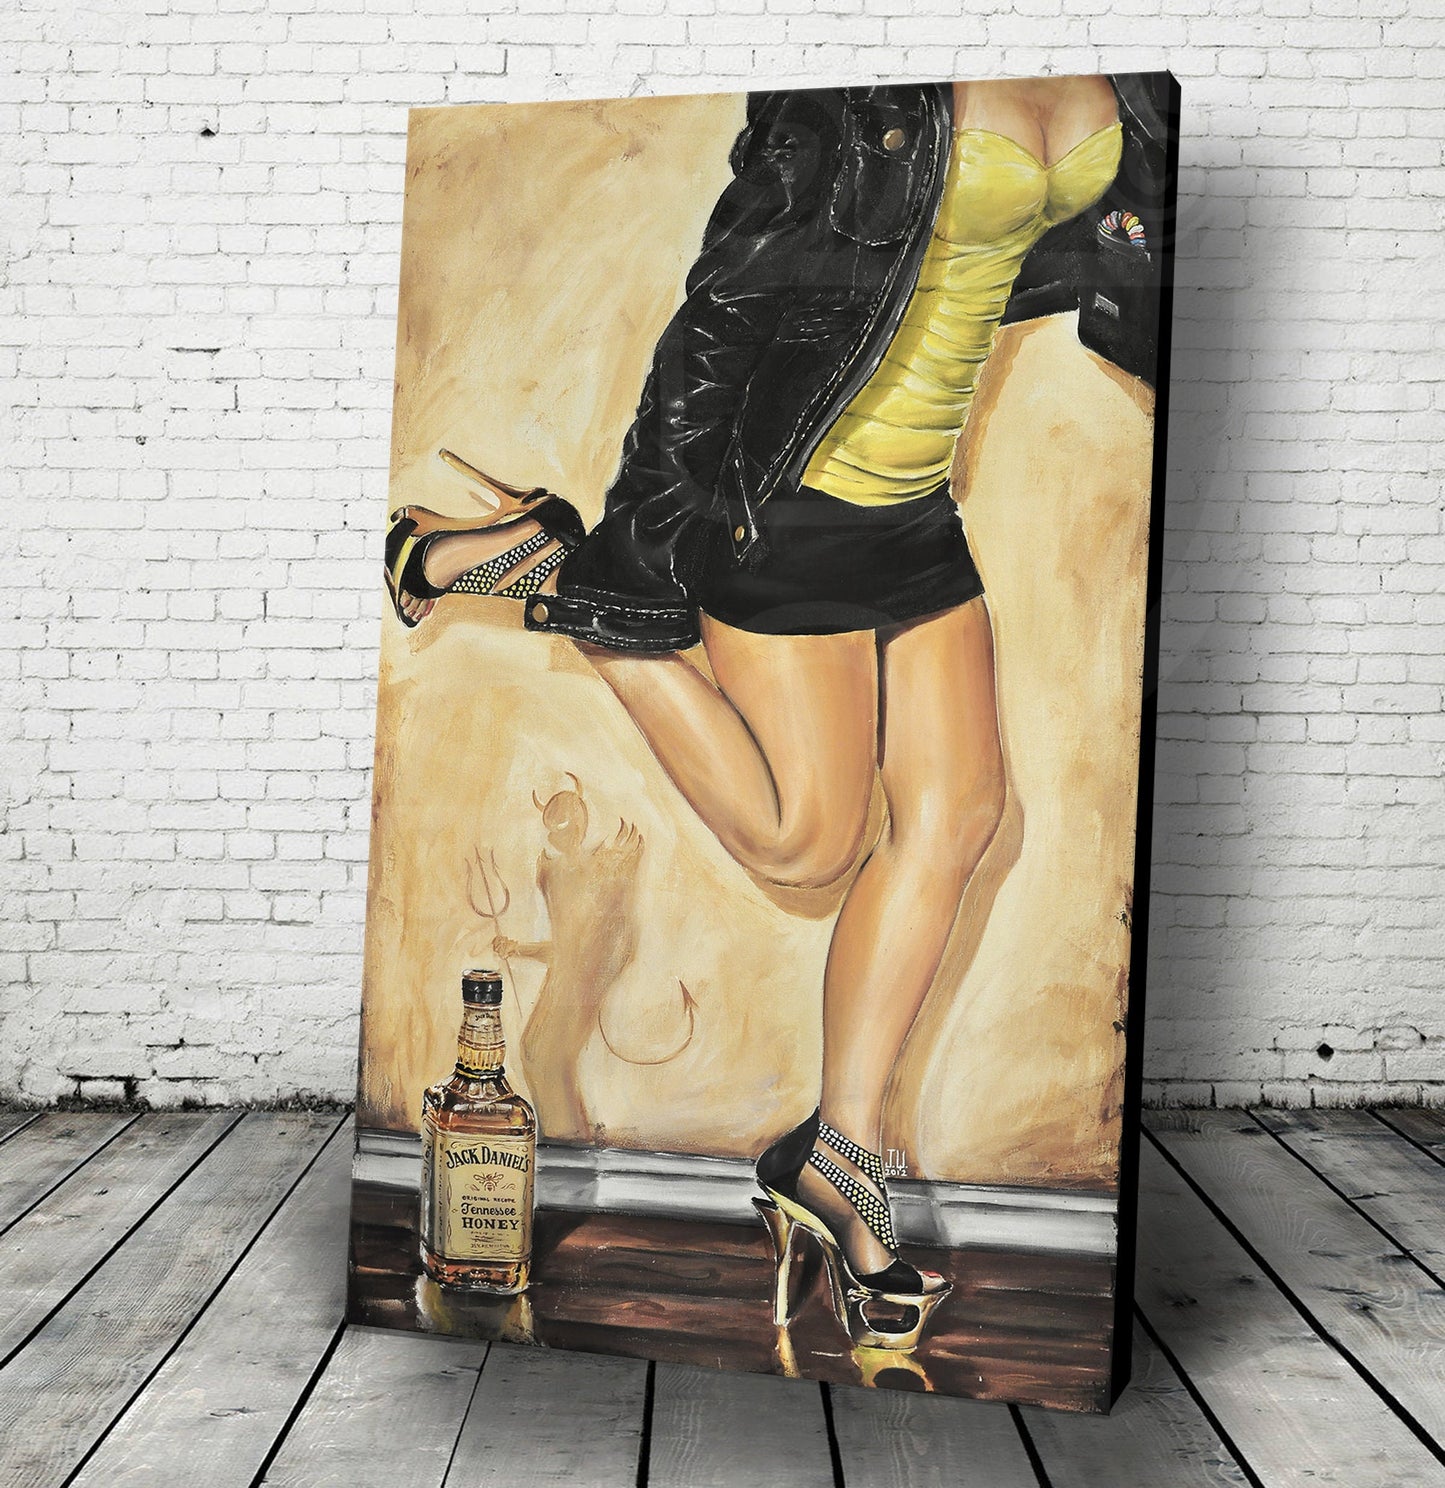 JEREMY WORST "Dancing with the Devil" Sexy Honey Canvas wall art Print Poster Decor nsfw sticker charm bottle gifts custom heel